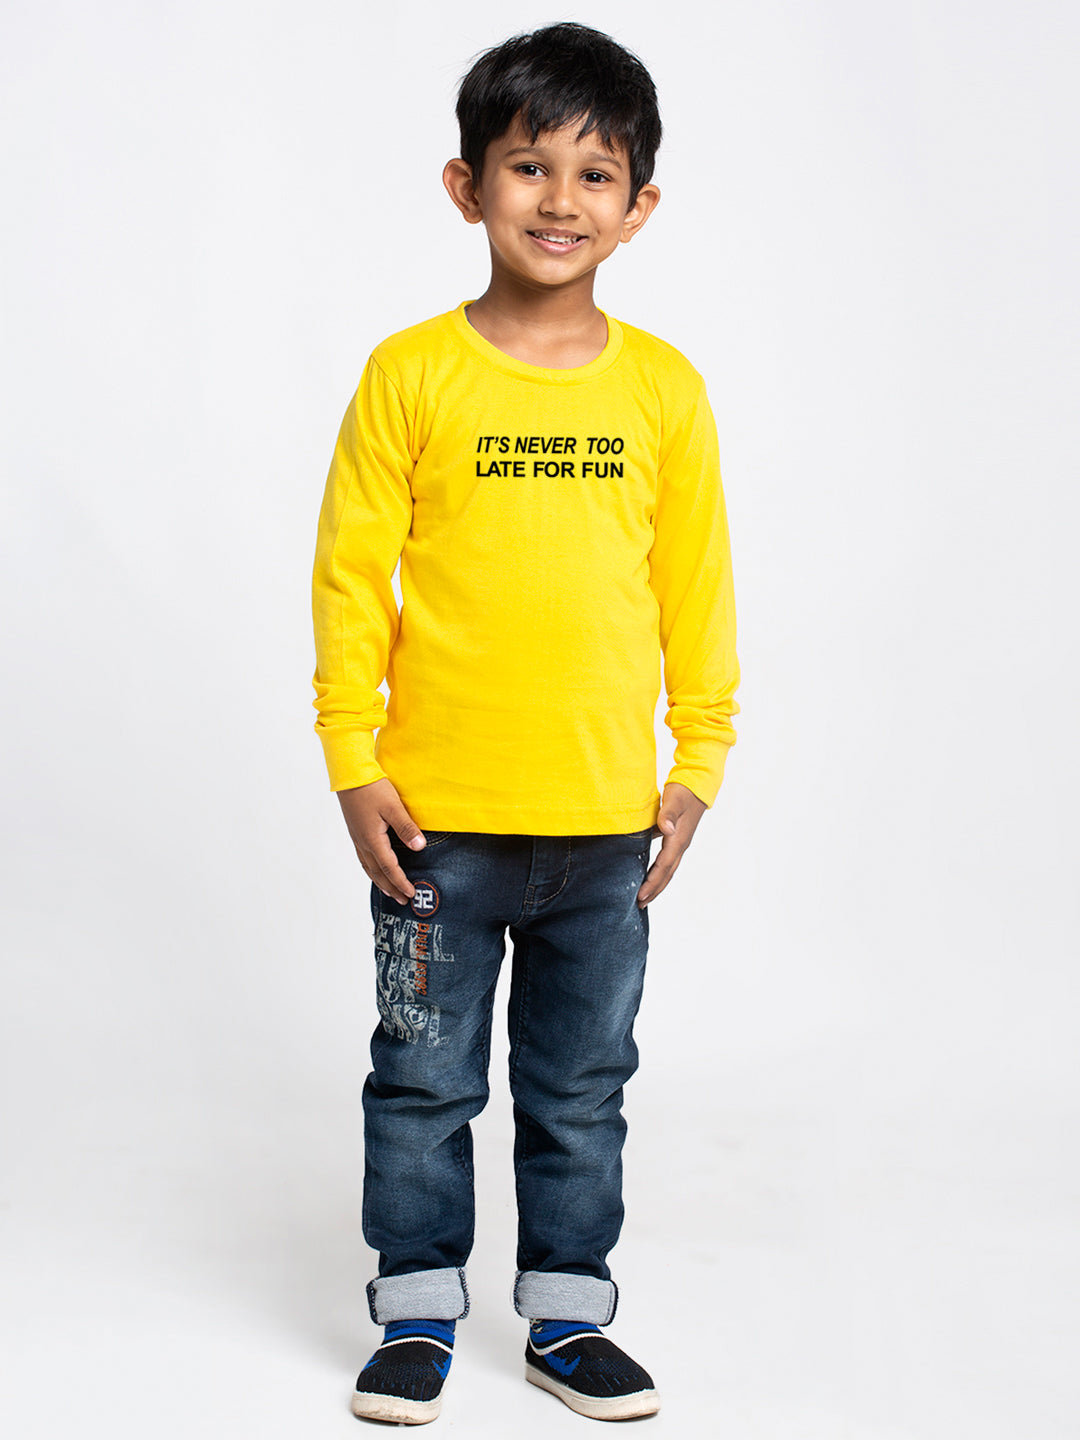 Kids Its Never Too Late For Fun printed full sleeves t-shirt - Friskers